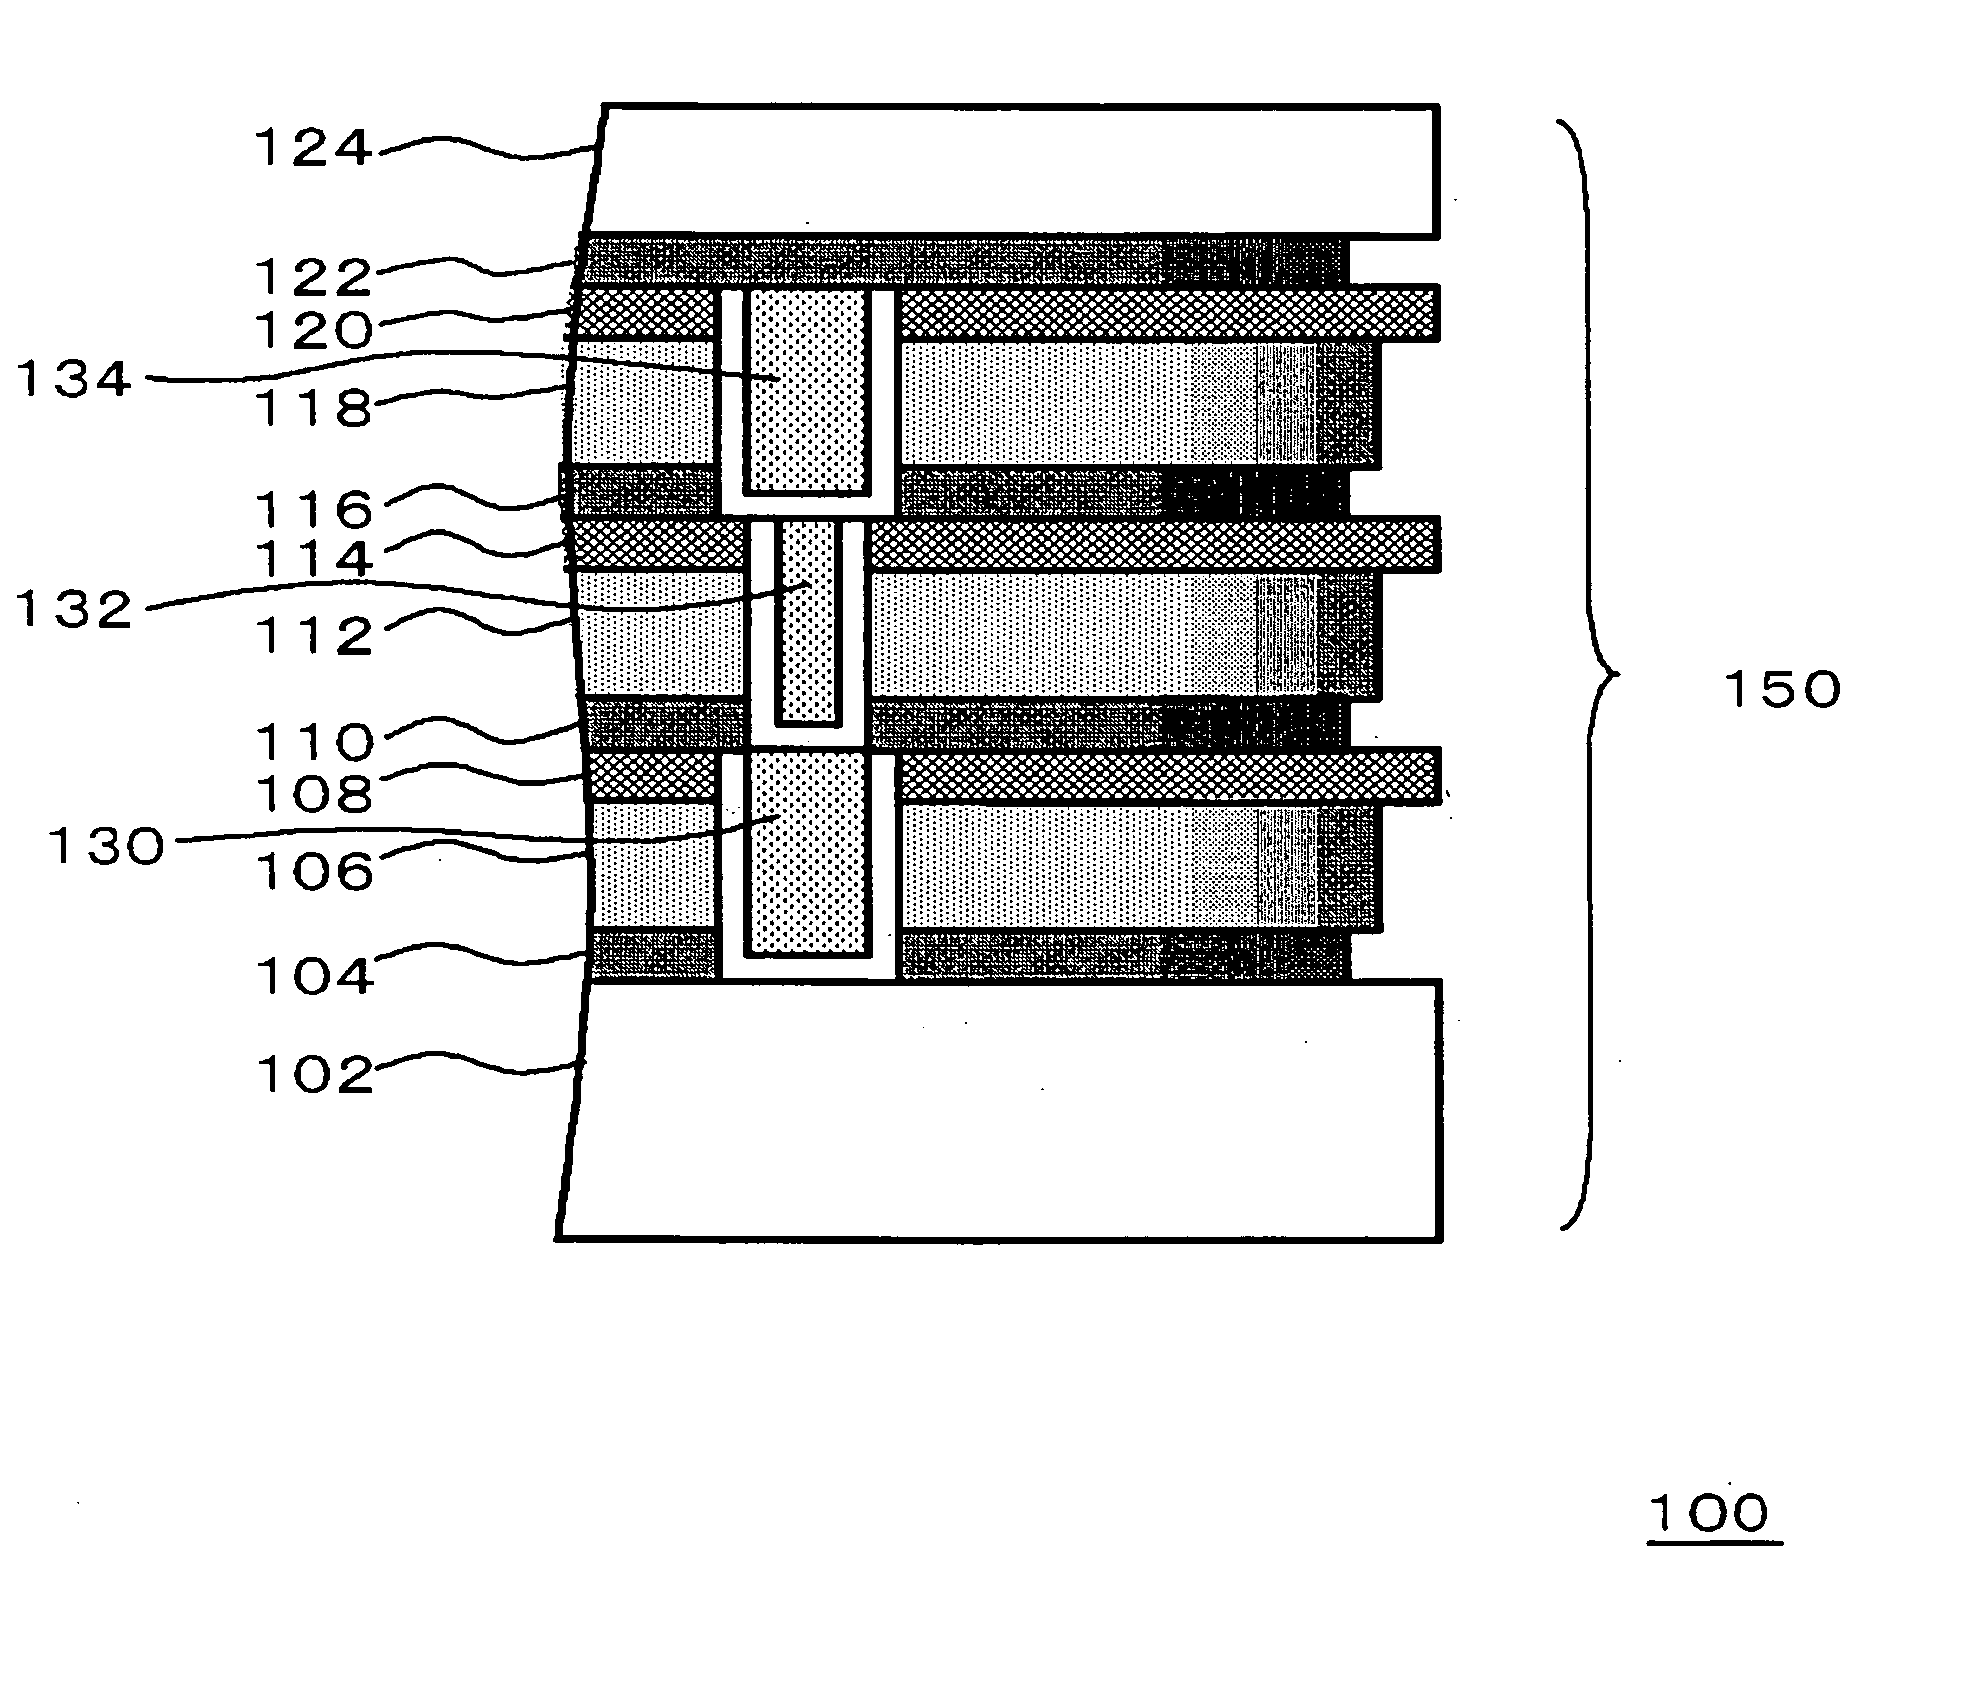 Semiconductor chip